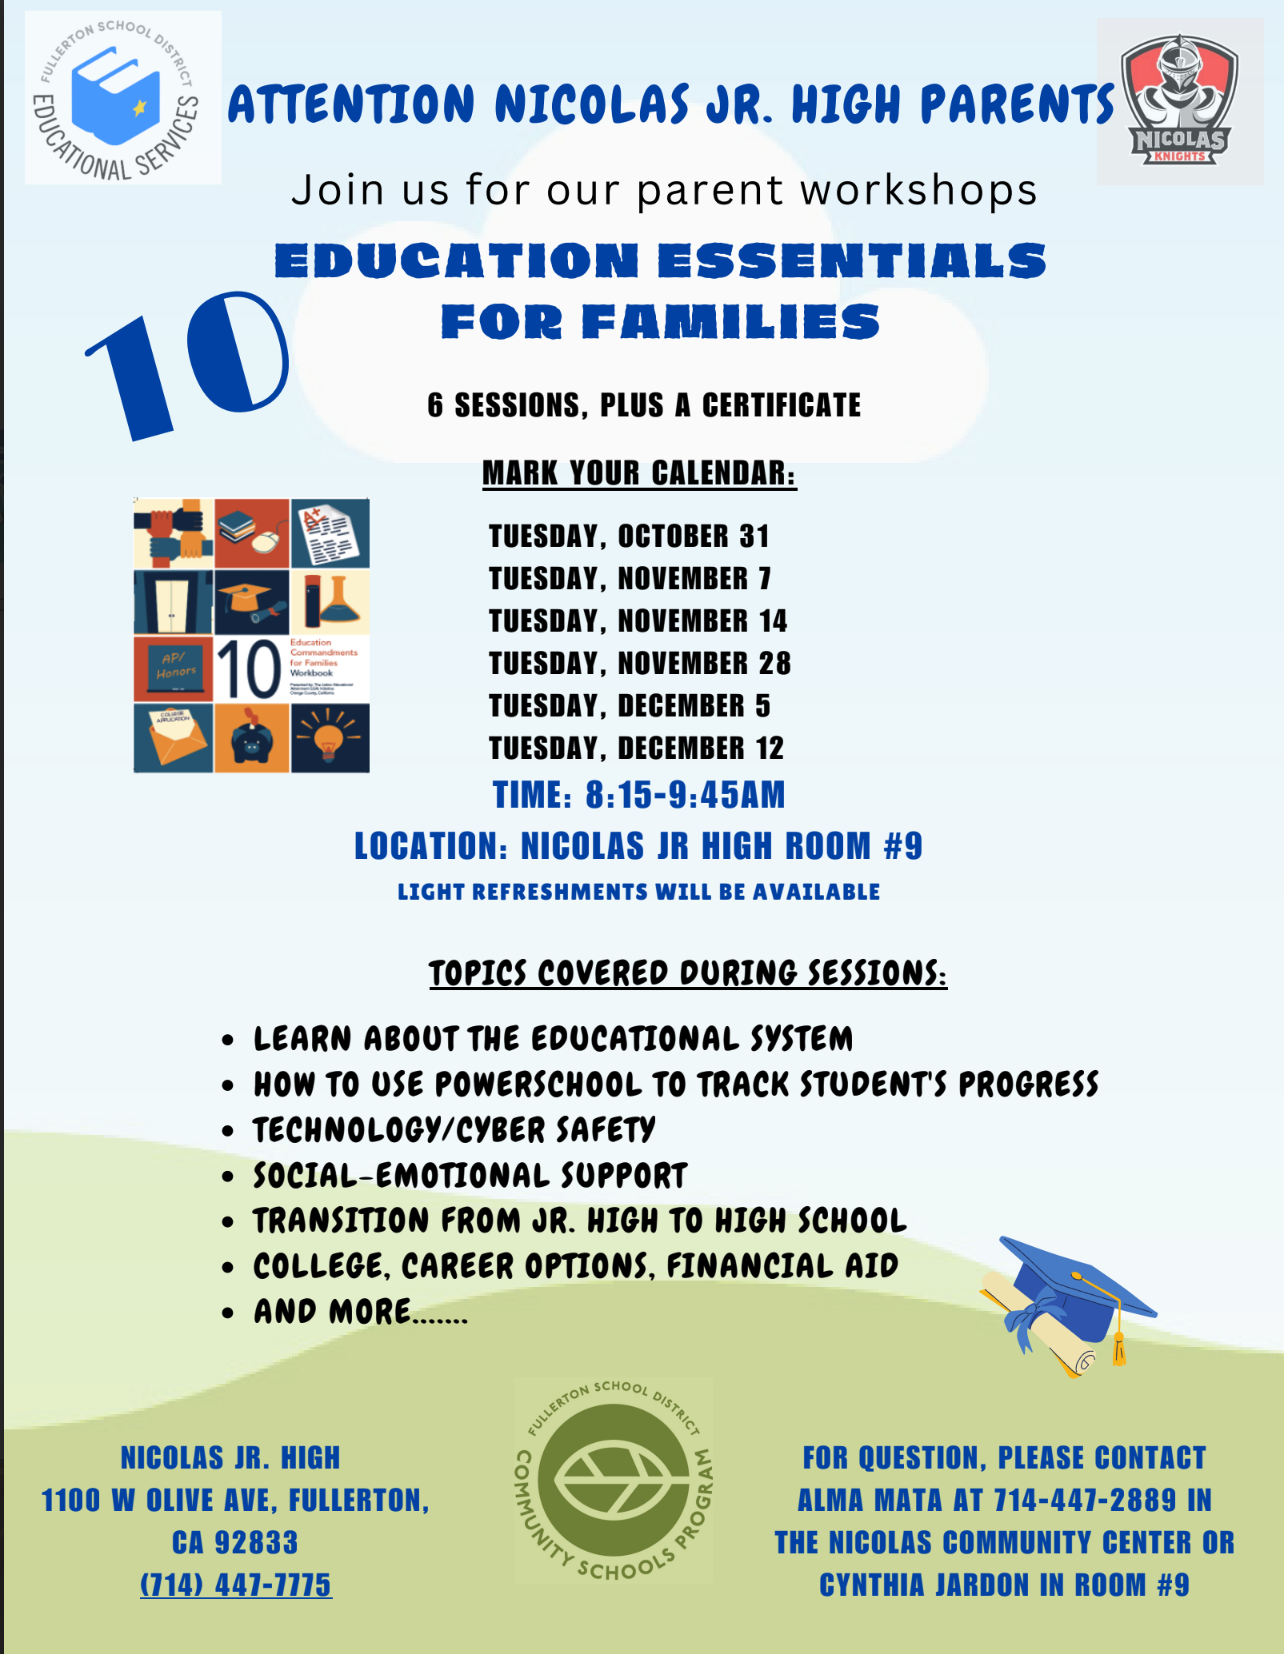  Education Essentials For Families